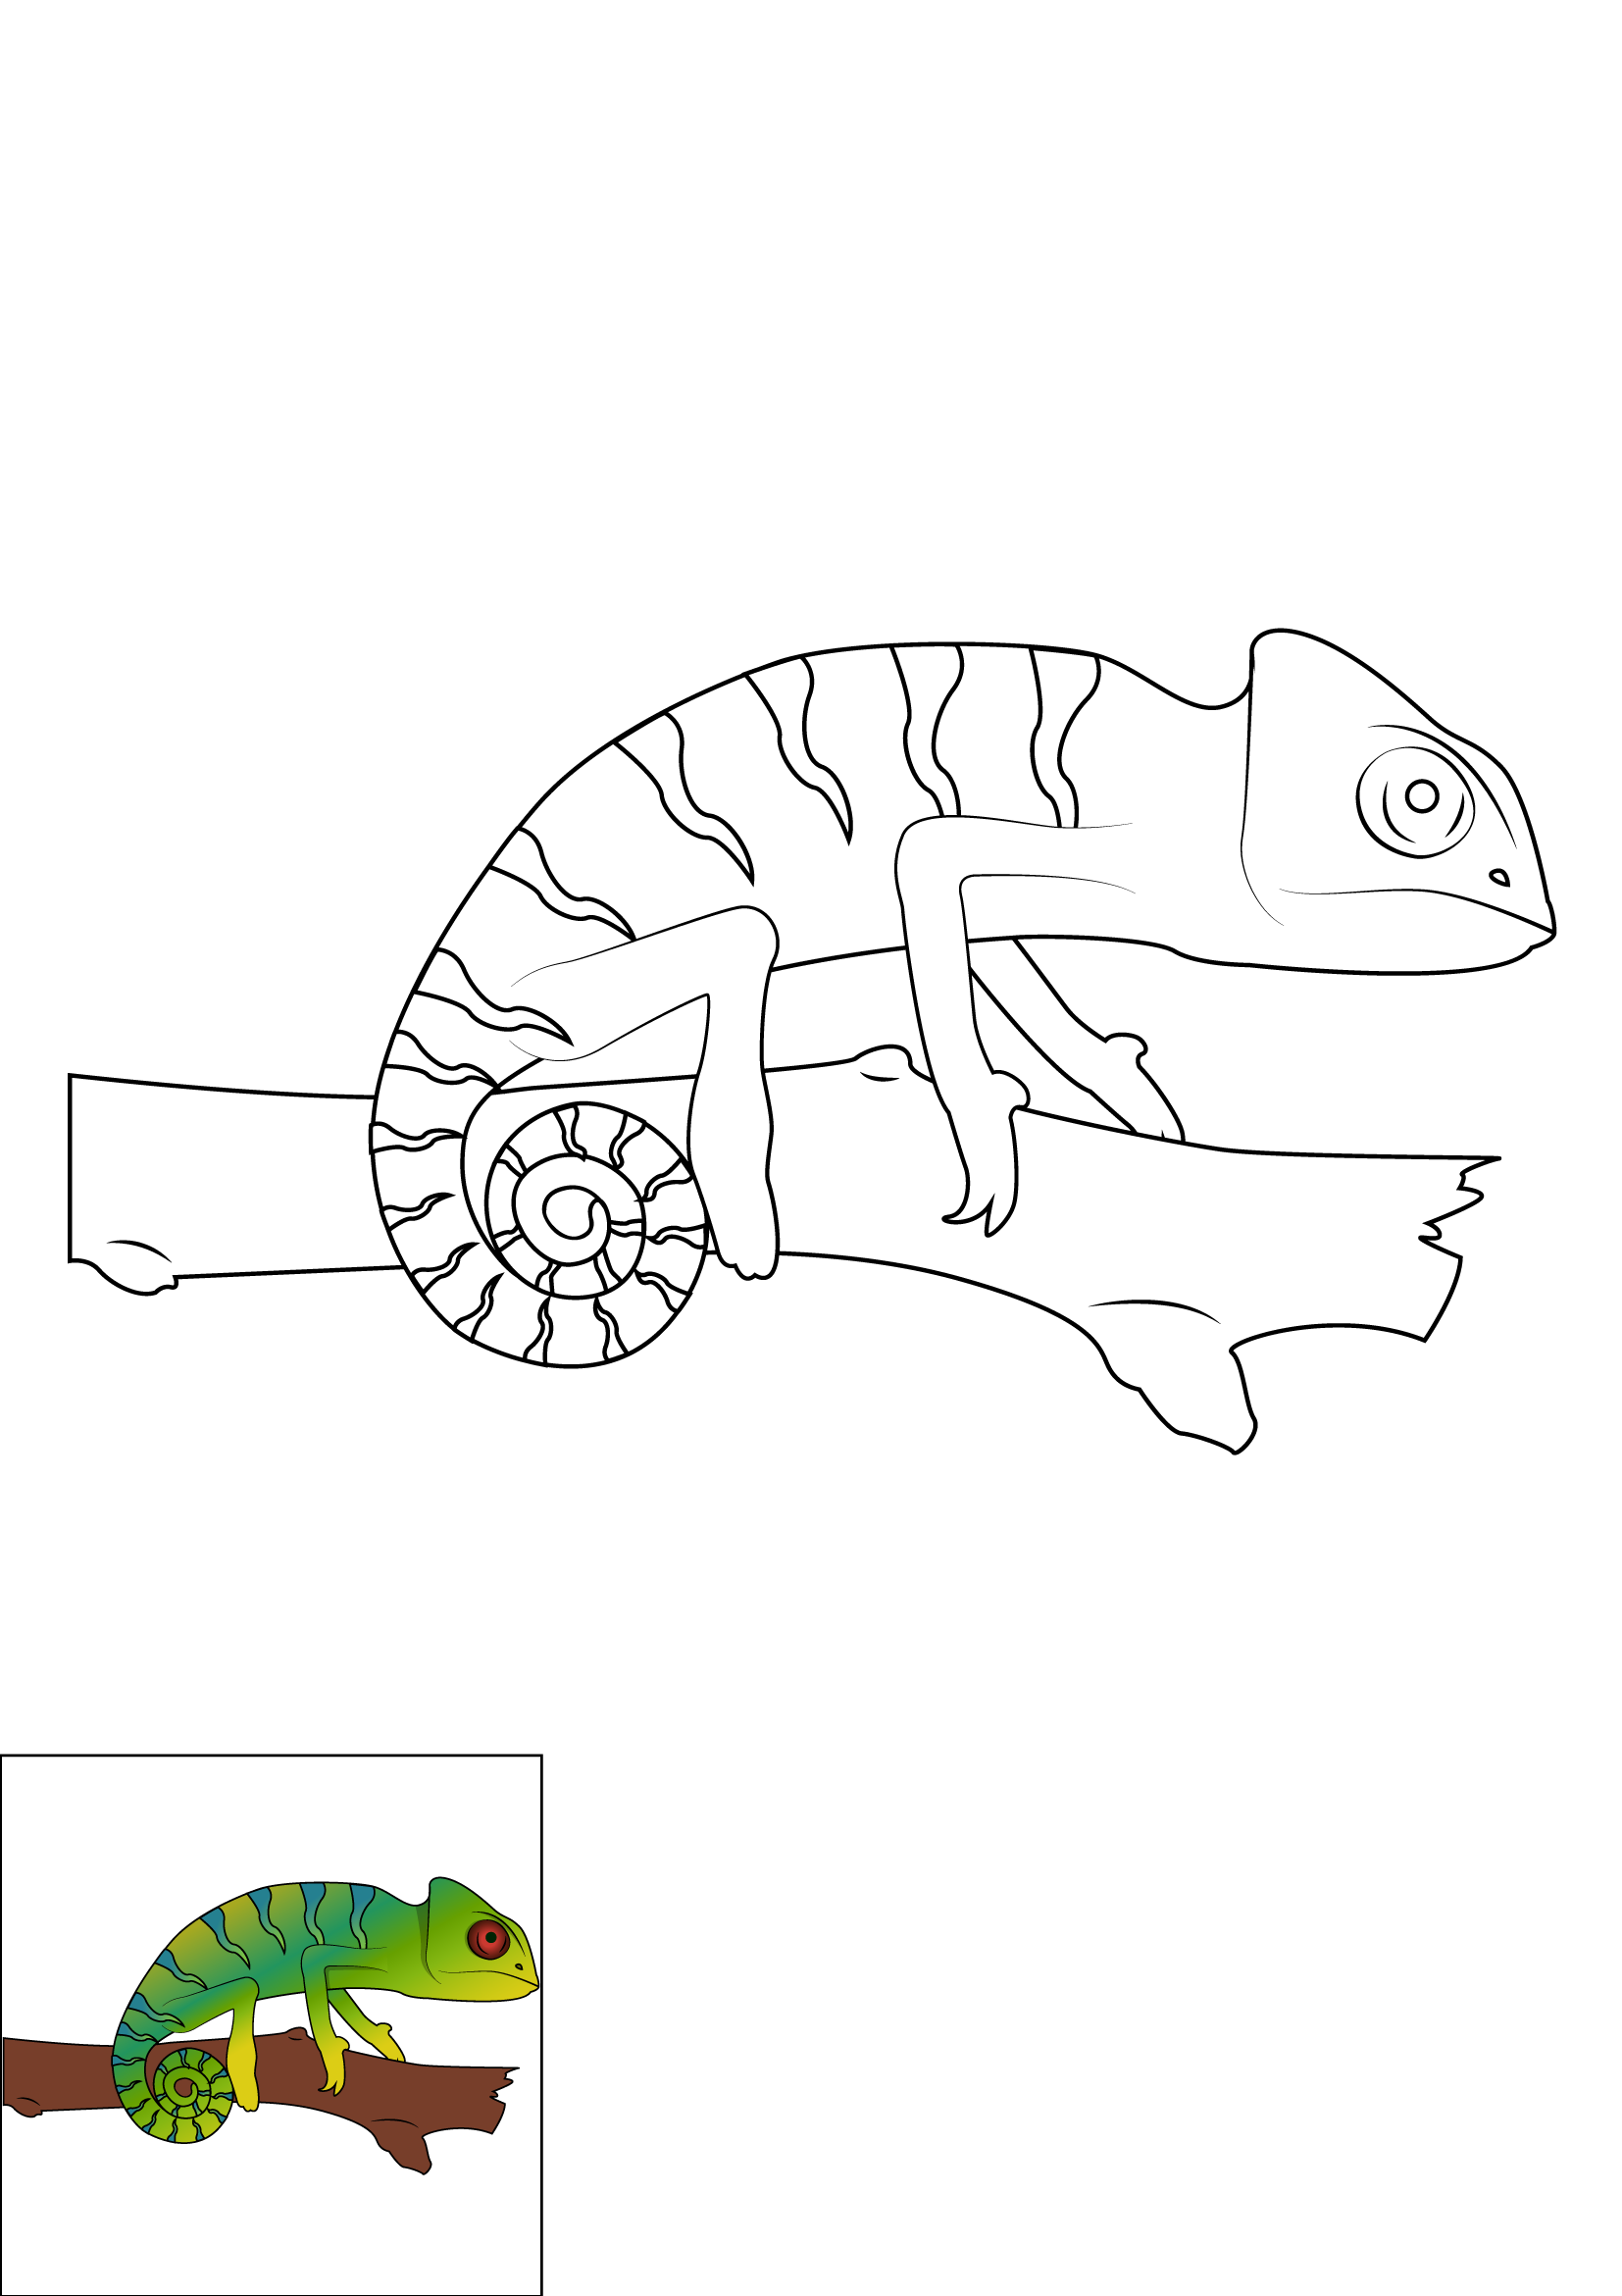 How to Draw A Chameleon Step by Step Printable Color